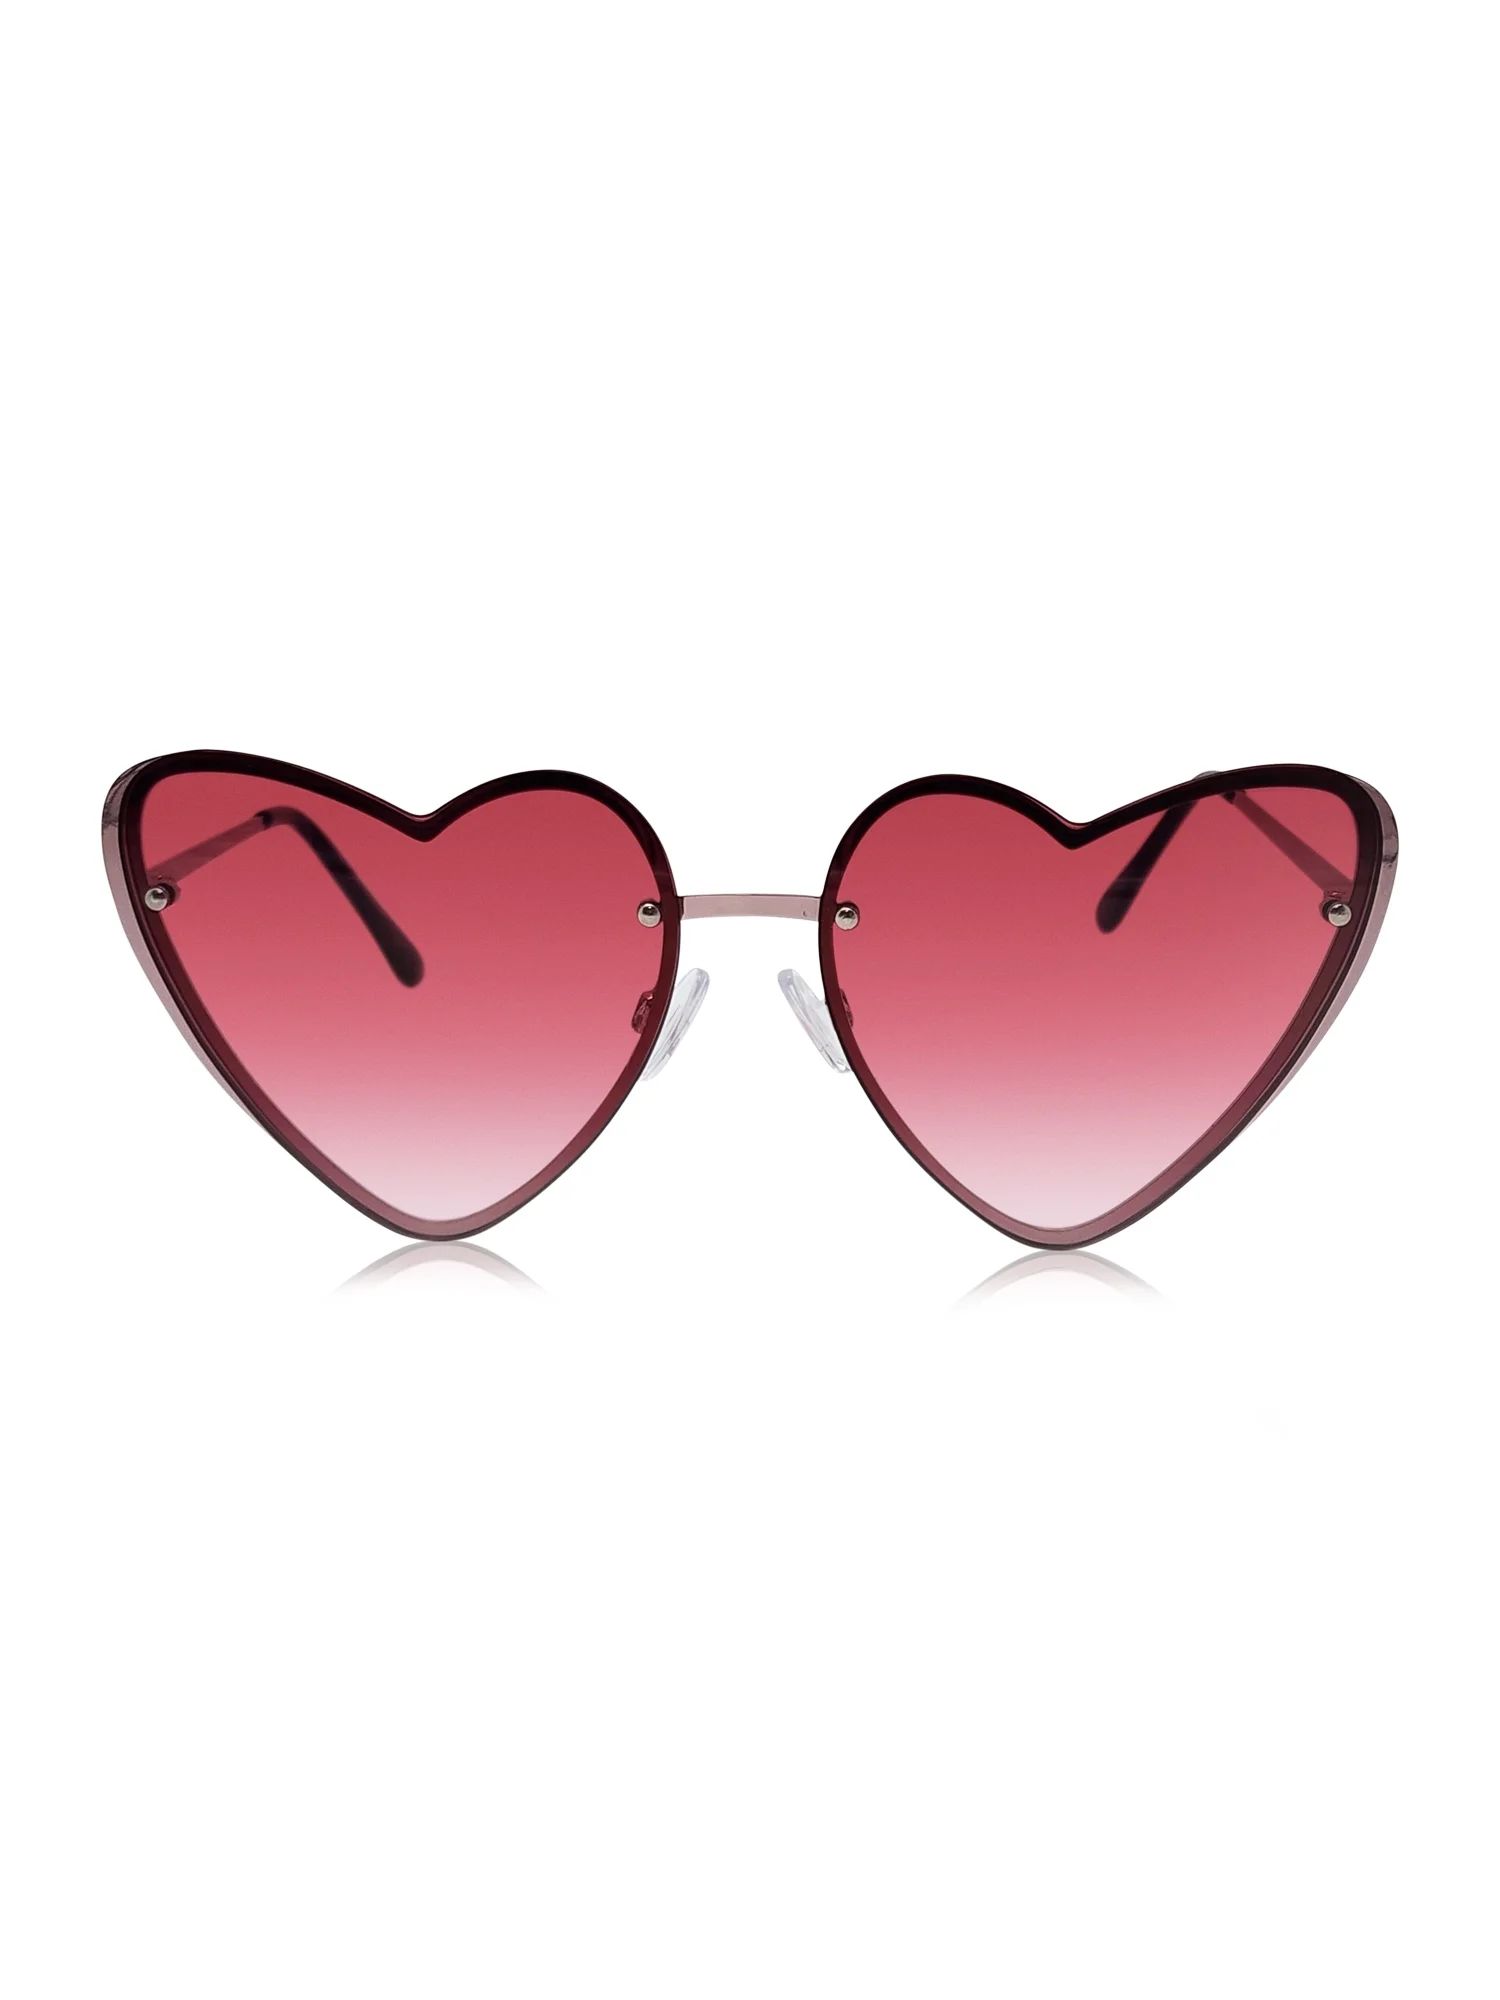 No Boundaries Women's Amour Pink Metal Sunglasses with Pink Neoprene Pouch, Pink | Walmart (US)